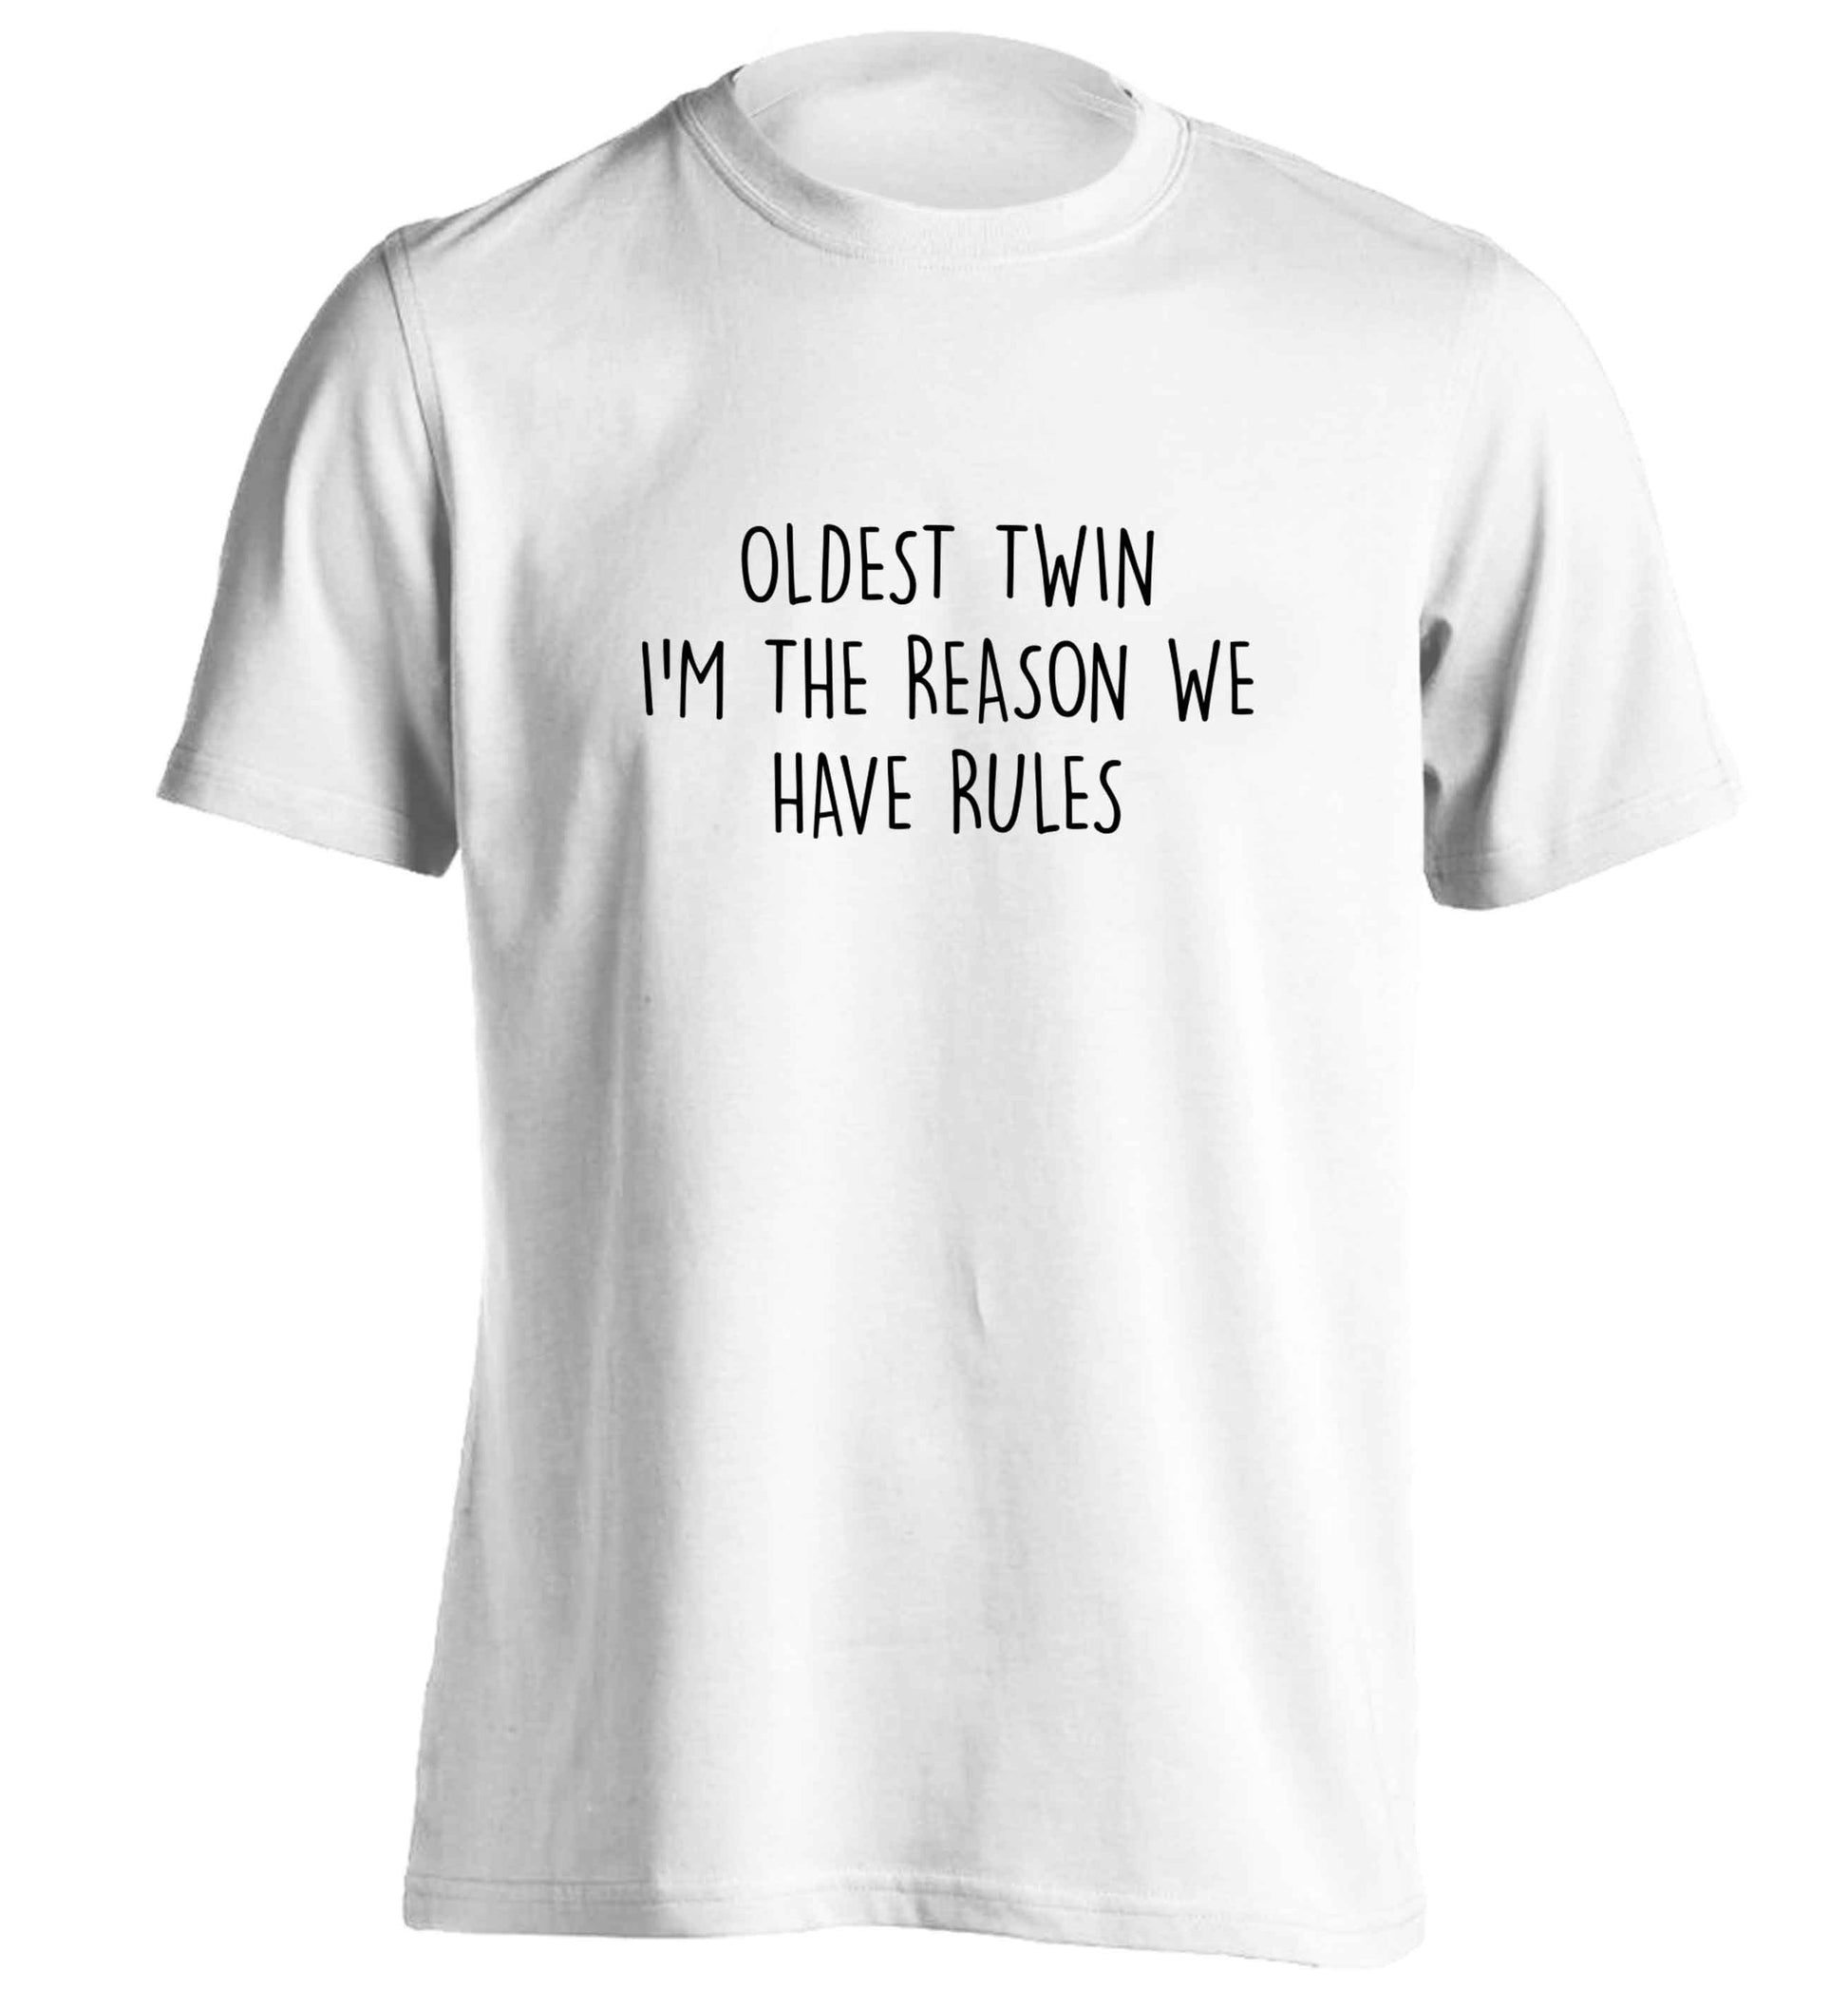 Oldest twin I'm the reason we have rules adults unisex white Tshirt 2XL